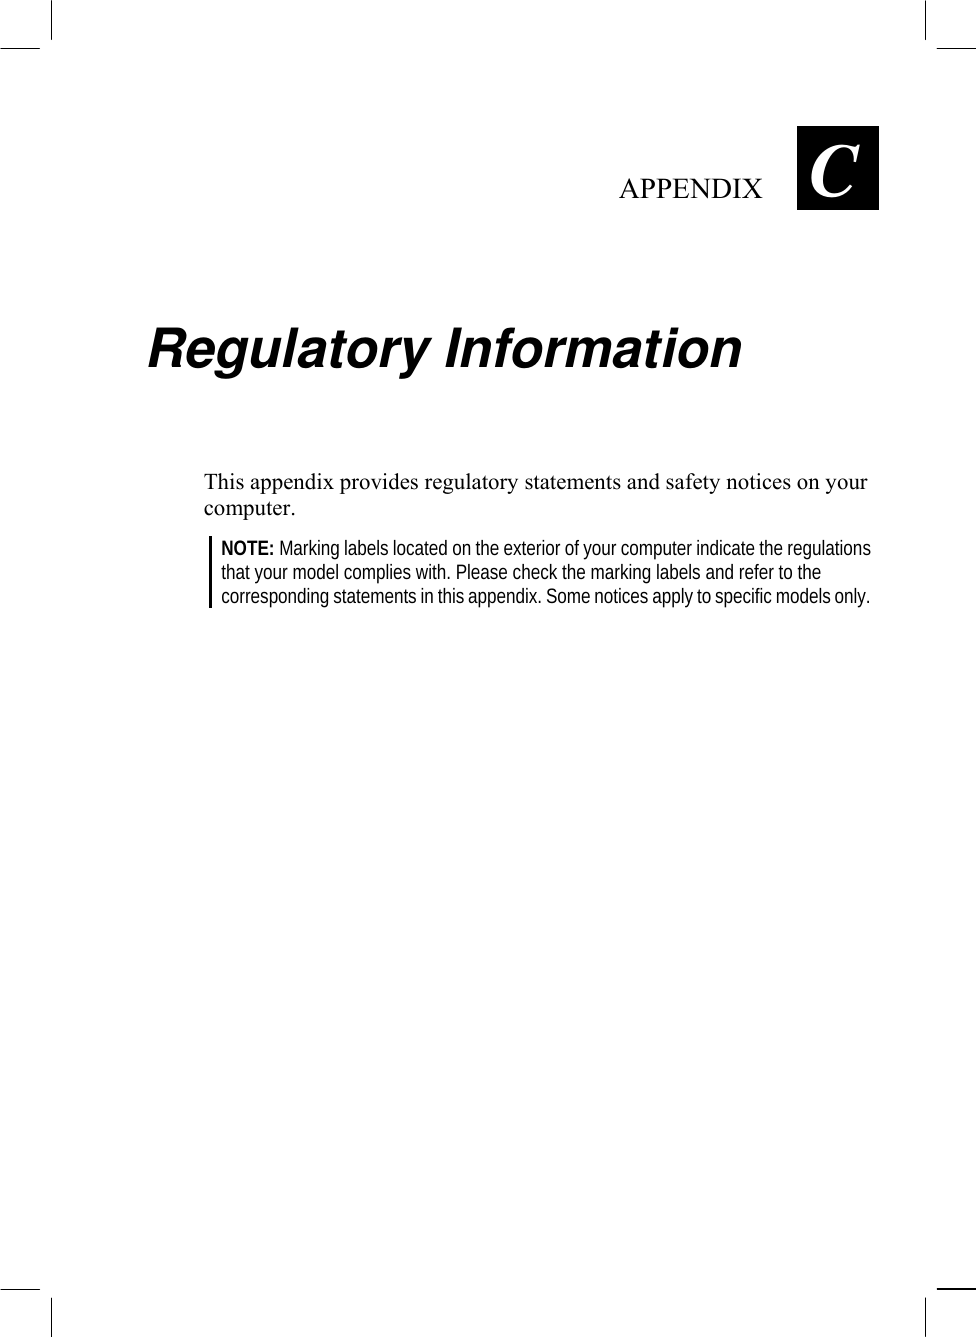   APPENDIX  C Regulatory Information This appendix provides regulatory statements and safety notices on your computer. NOTE: Marking labels located on the exterior of your computer indicate the regulations that your model complies with. Please check the marking labels and refer to the corresponding statements in this appendix. Some notices apply to specific models only.  